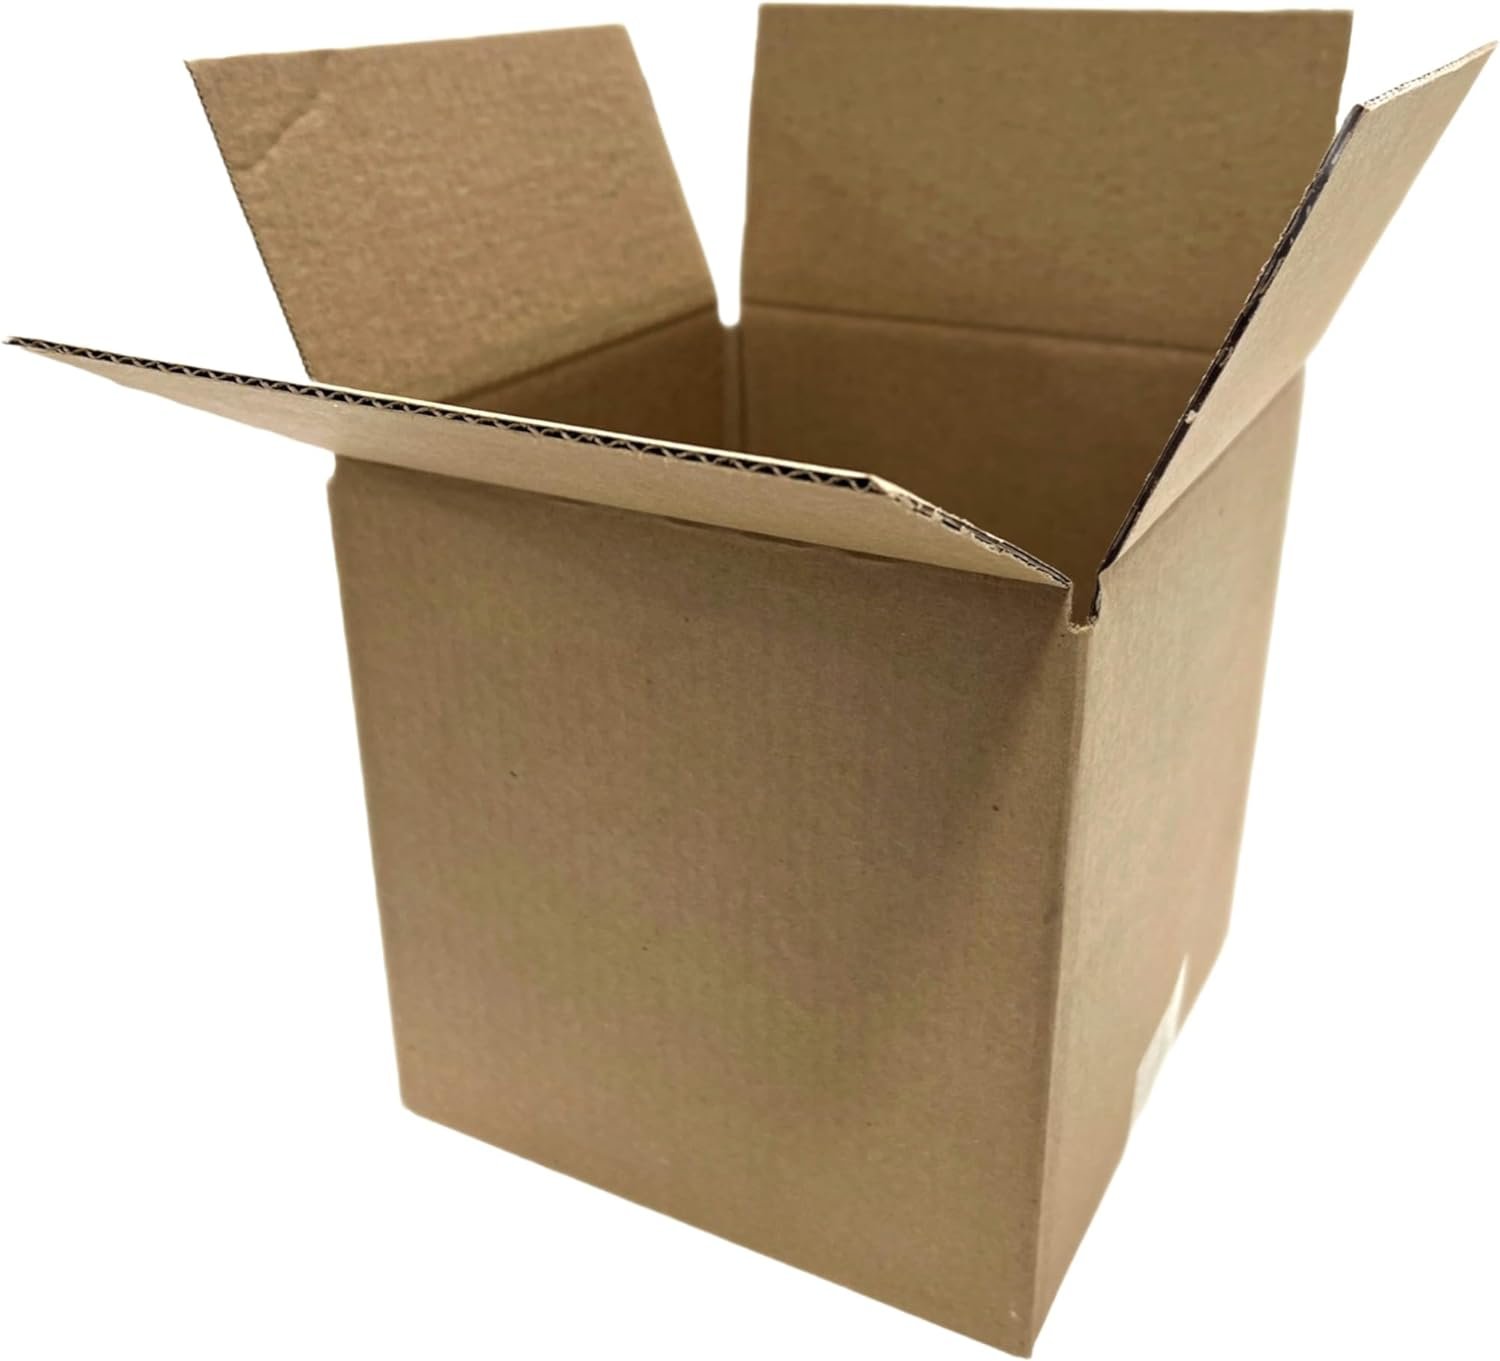 400 5x5x5 Cardboard Paper Boxes Mailing Packing Shipping Box Corrugated Carton